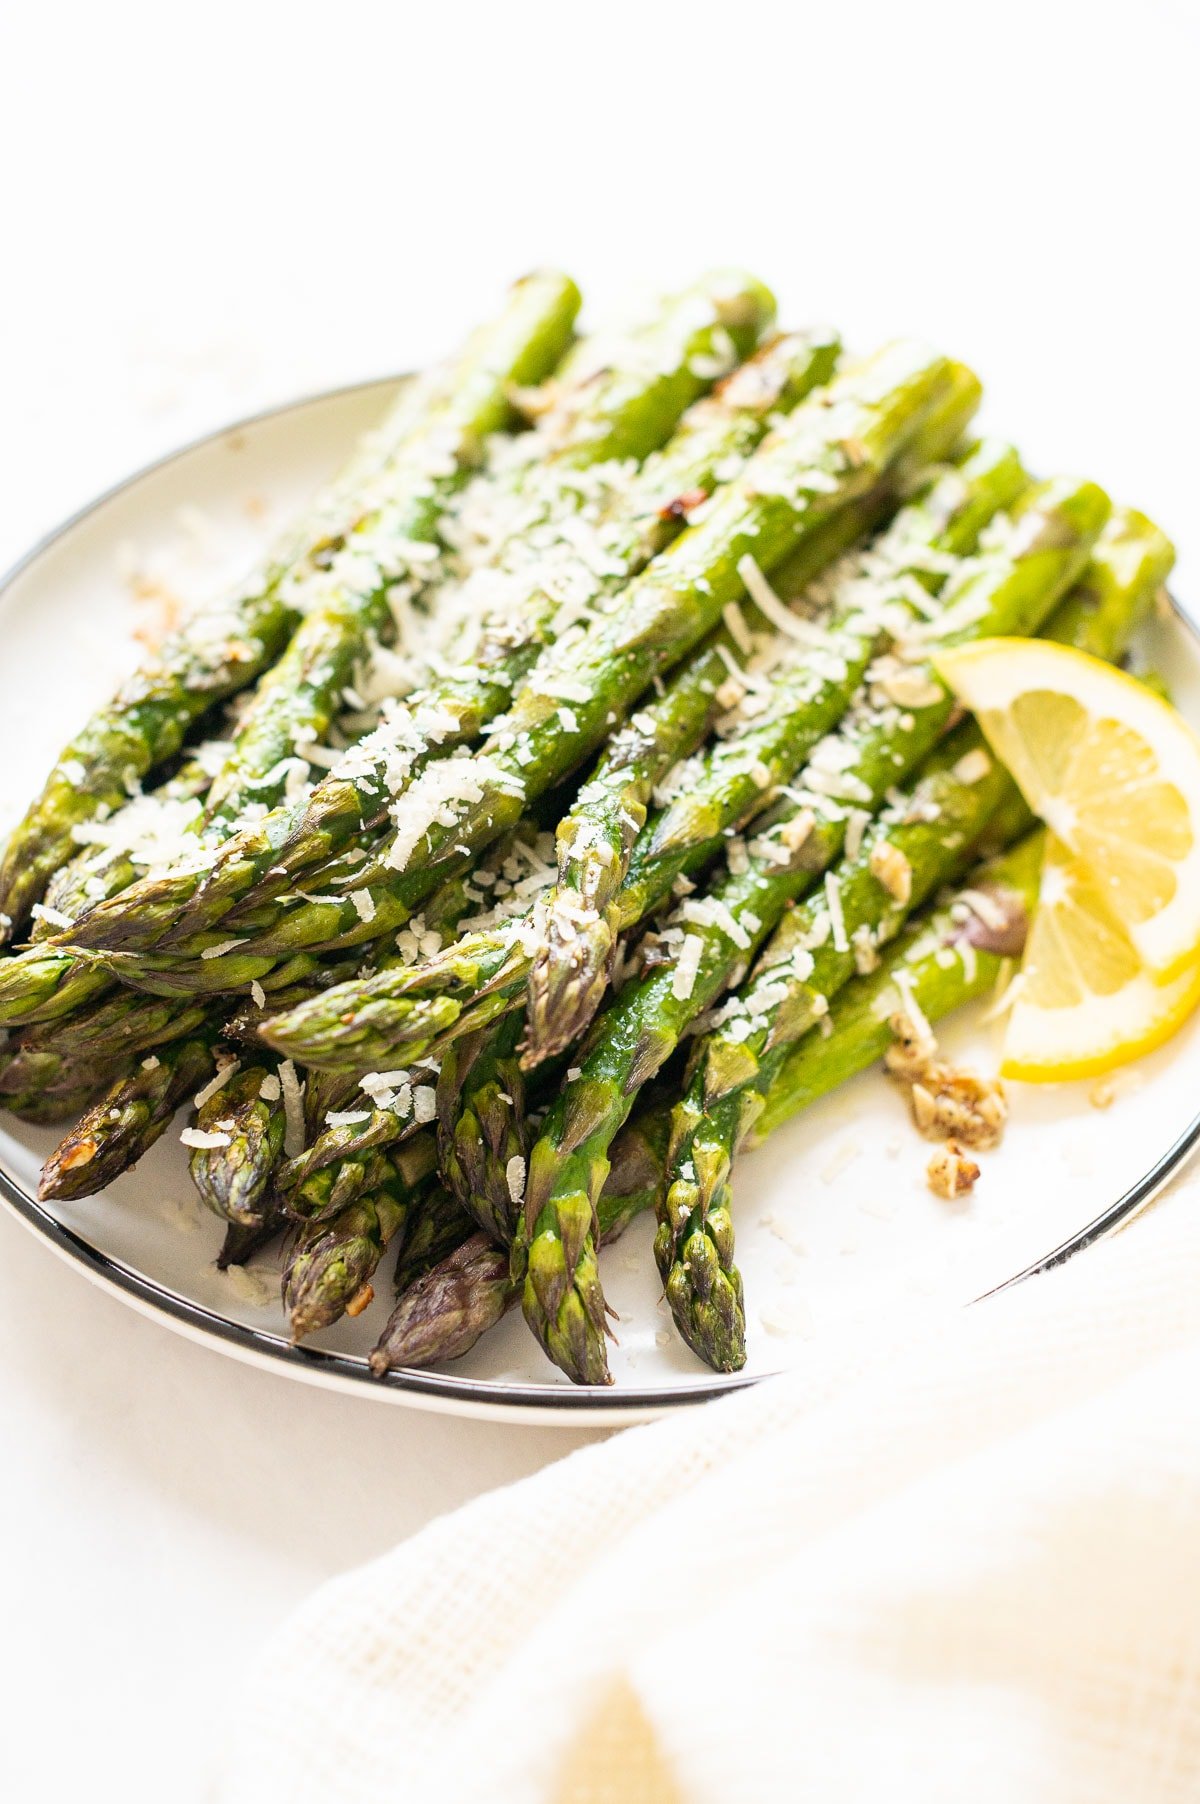 Oven roasted asparagus recipe served on a plate with Parmesan and lemon slices.